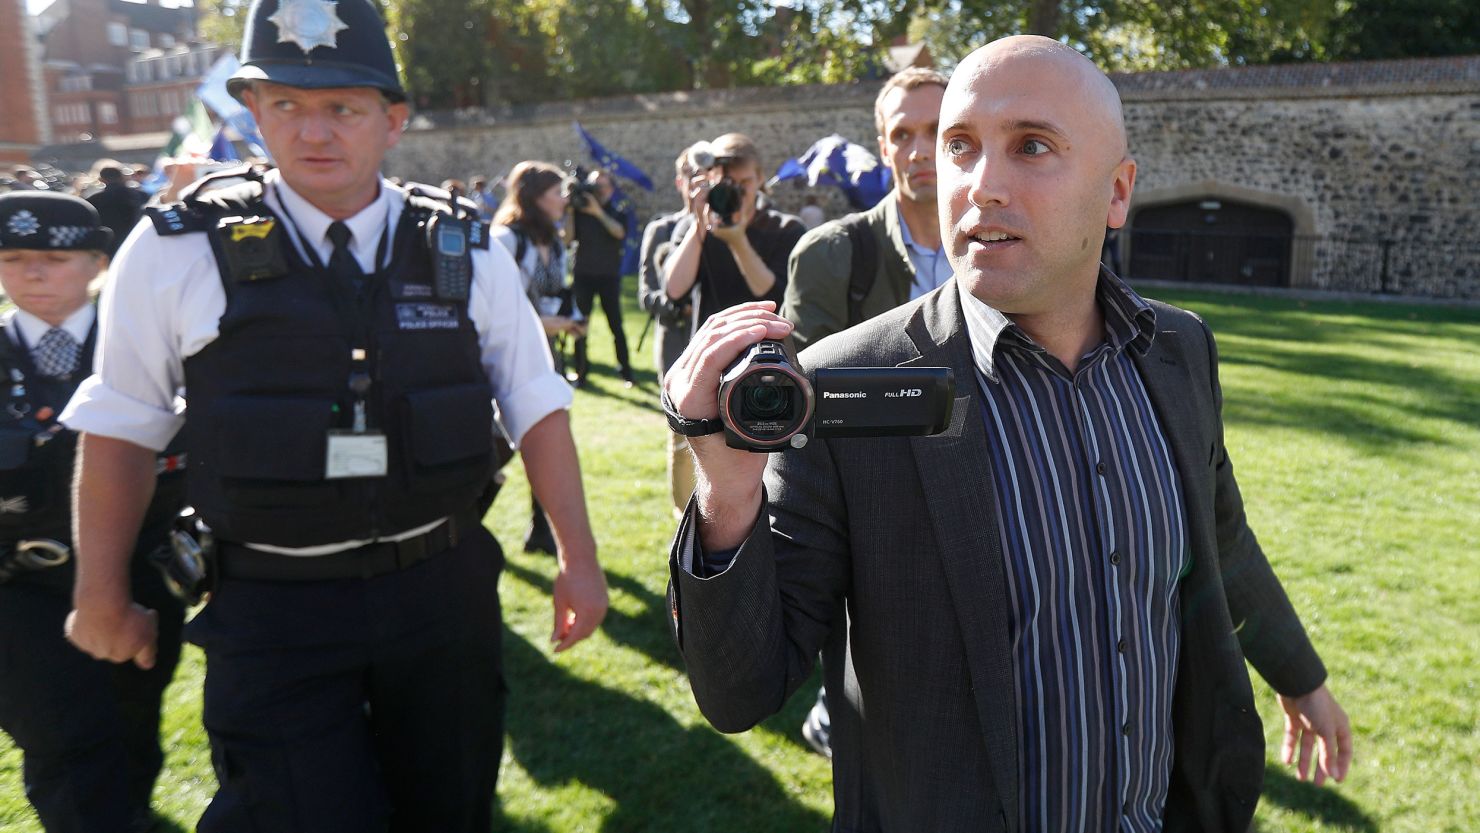 Blogger Graham Phillips is escorted away by police officers after he disrupted a press conference by Bellingcat founder Eliot Higgins, report author Christo Grozev and MP Bob Seely opposite the Houses of Parliament in London, Britain, October 9, 2018. 